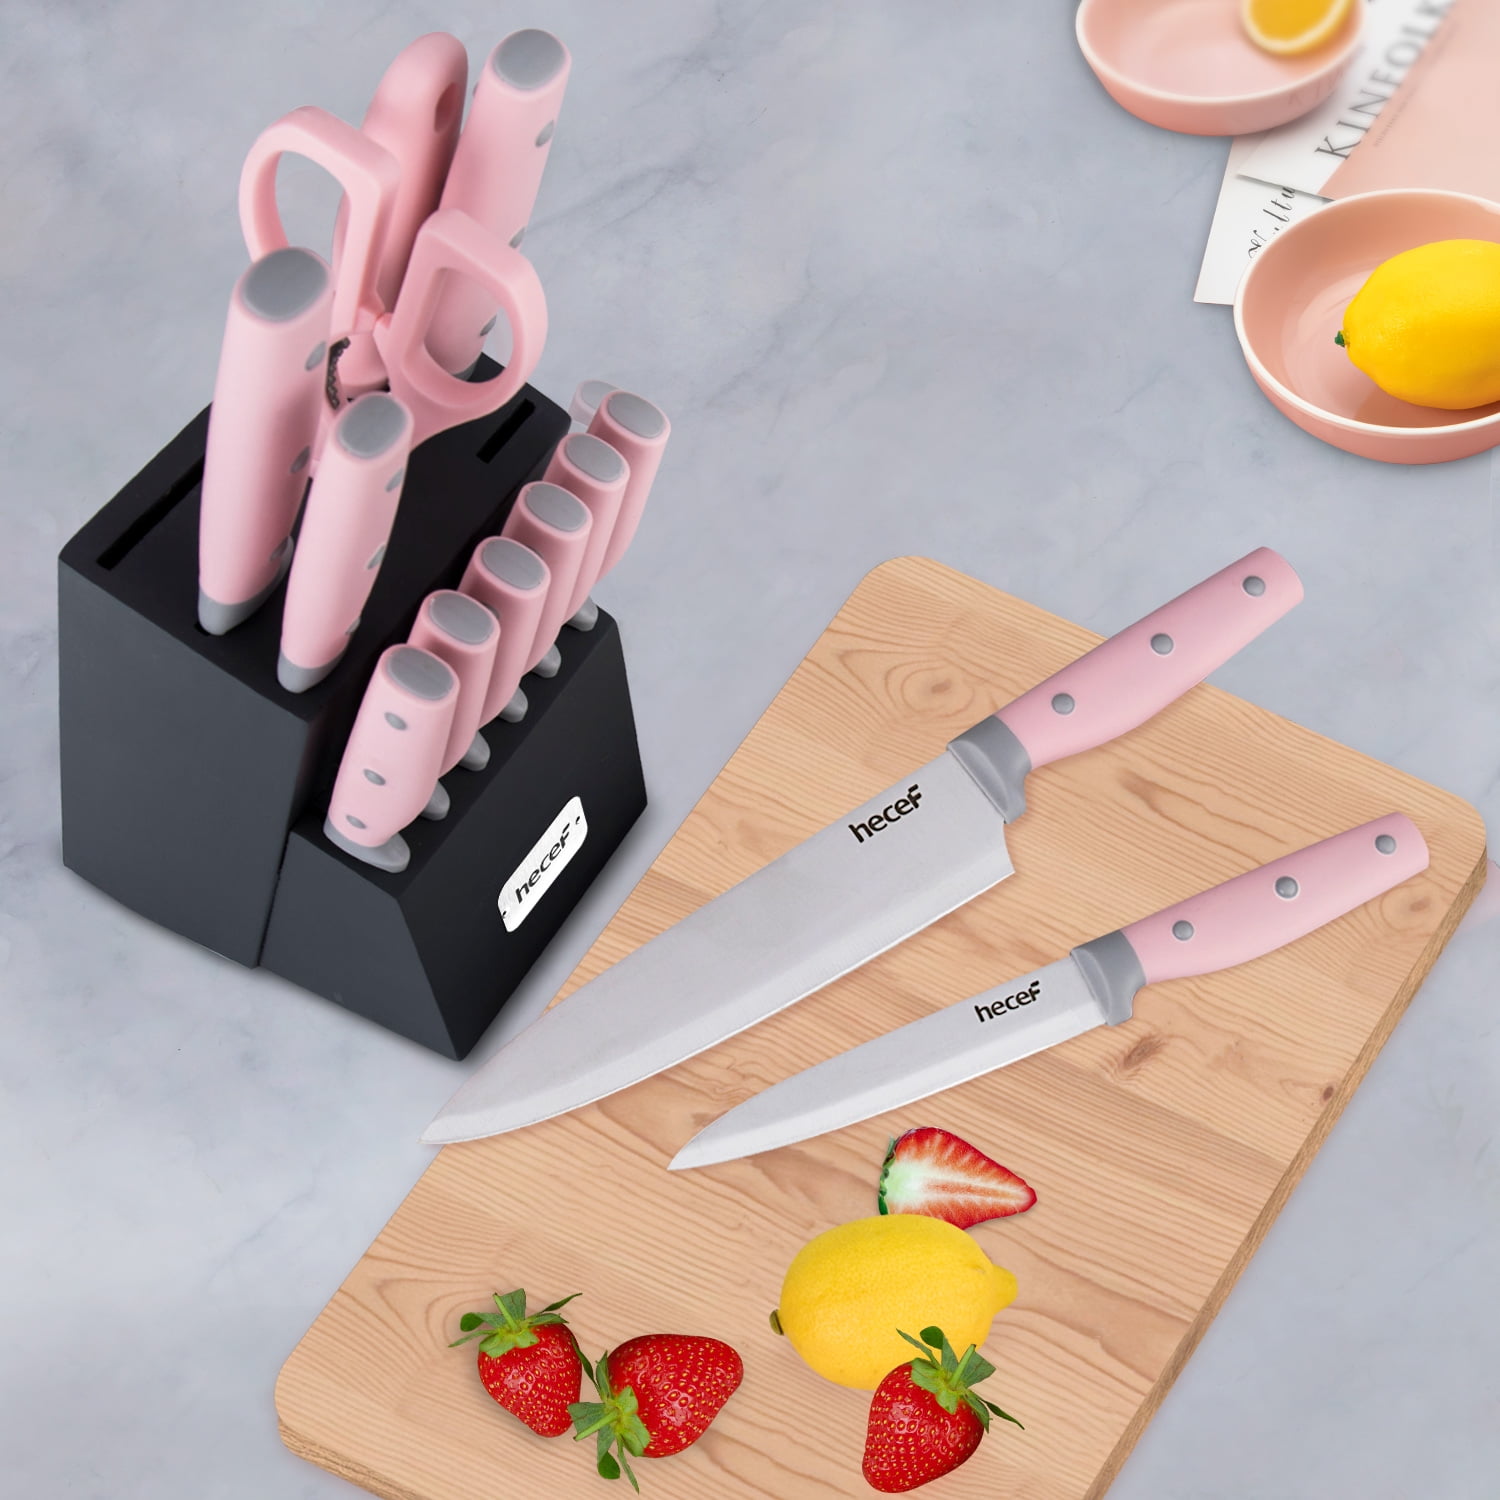 Hecef 15 Pcs Knife Set with Block Sharpener, High Carbon Stainless Steel Sharp Kitchen Knife, Size: 15 x 9 x 5.4, White